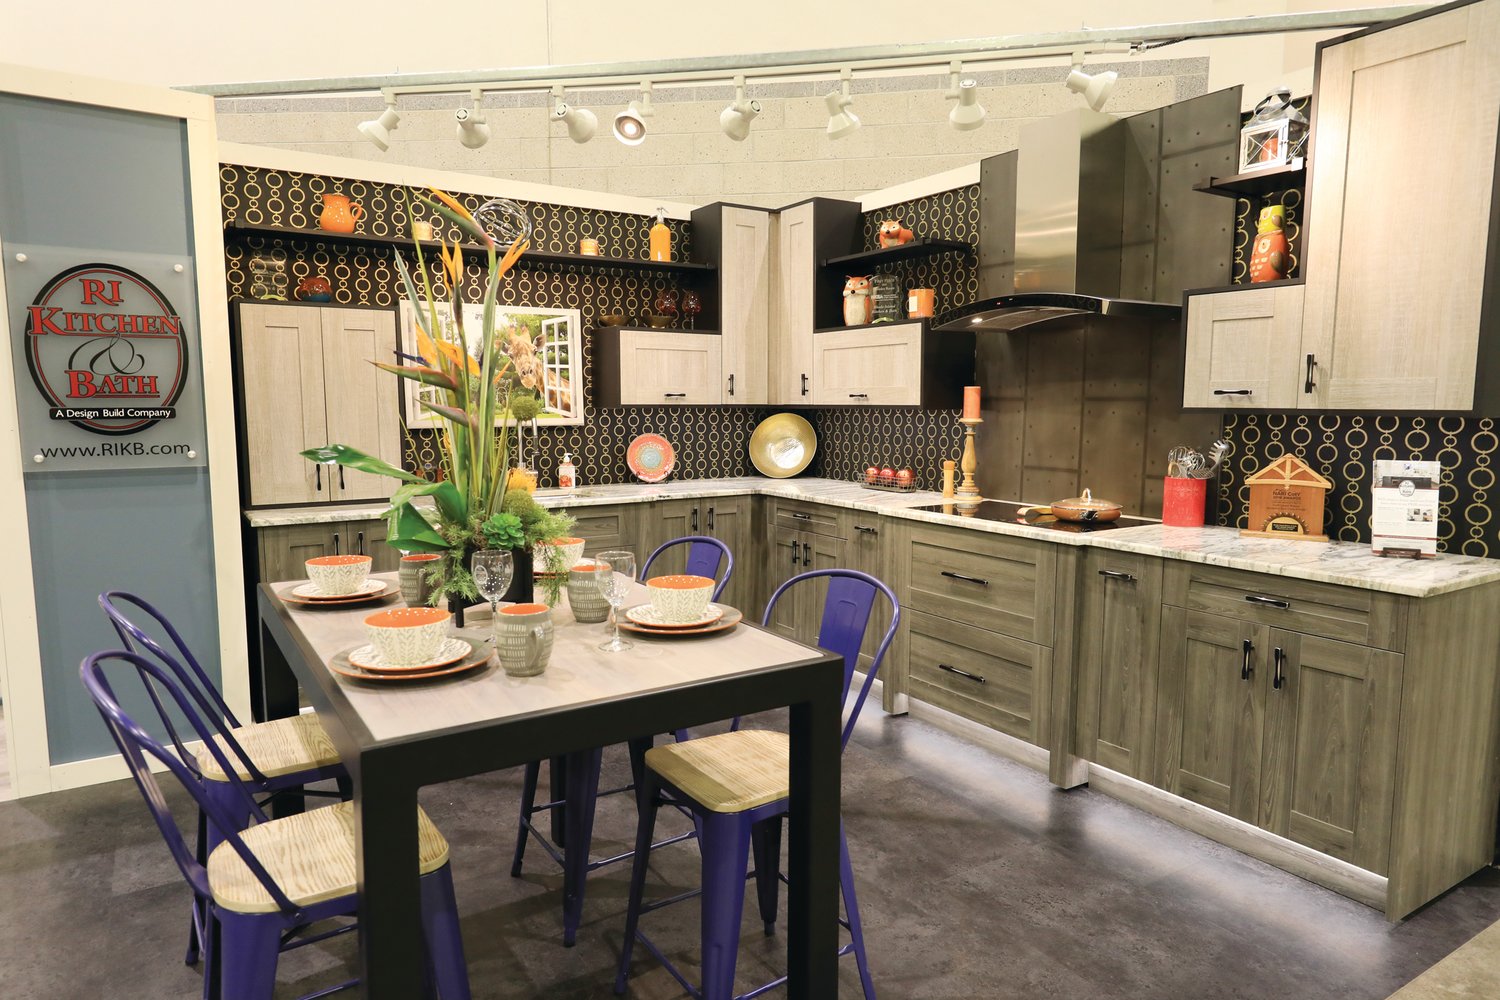 HOME SWEET HOME: RI kitchen and Bath display their products.